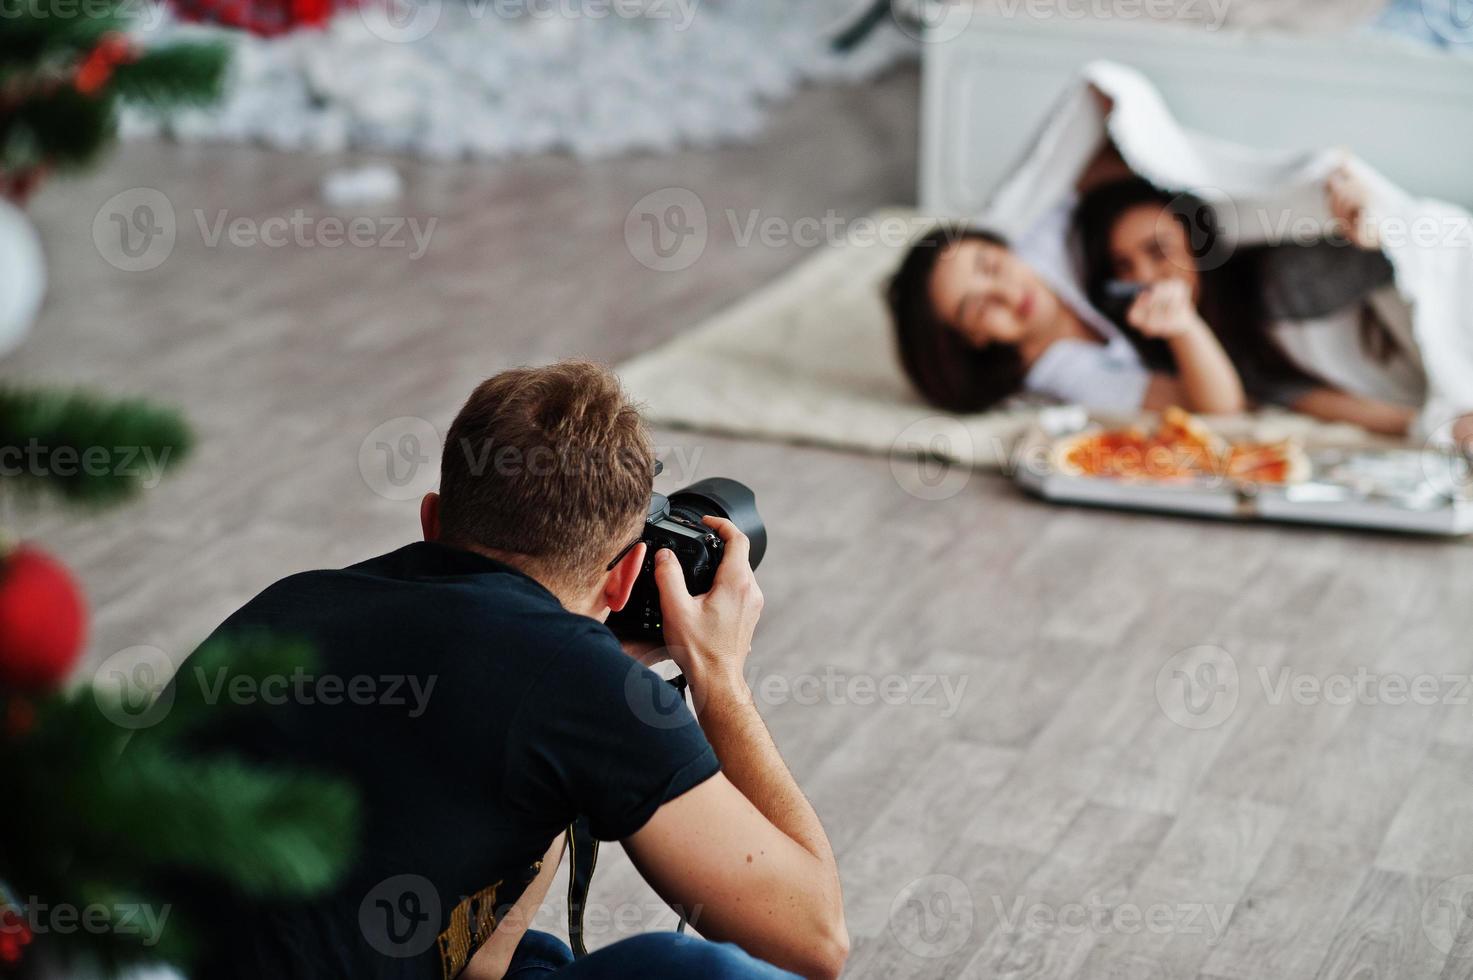 Man photographer shoot on studio twins girls who are eating pizza. Professional photographer on work. photo